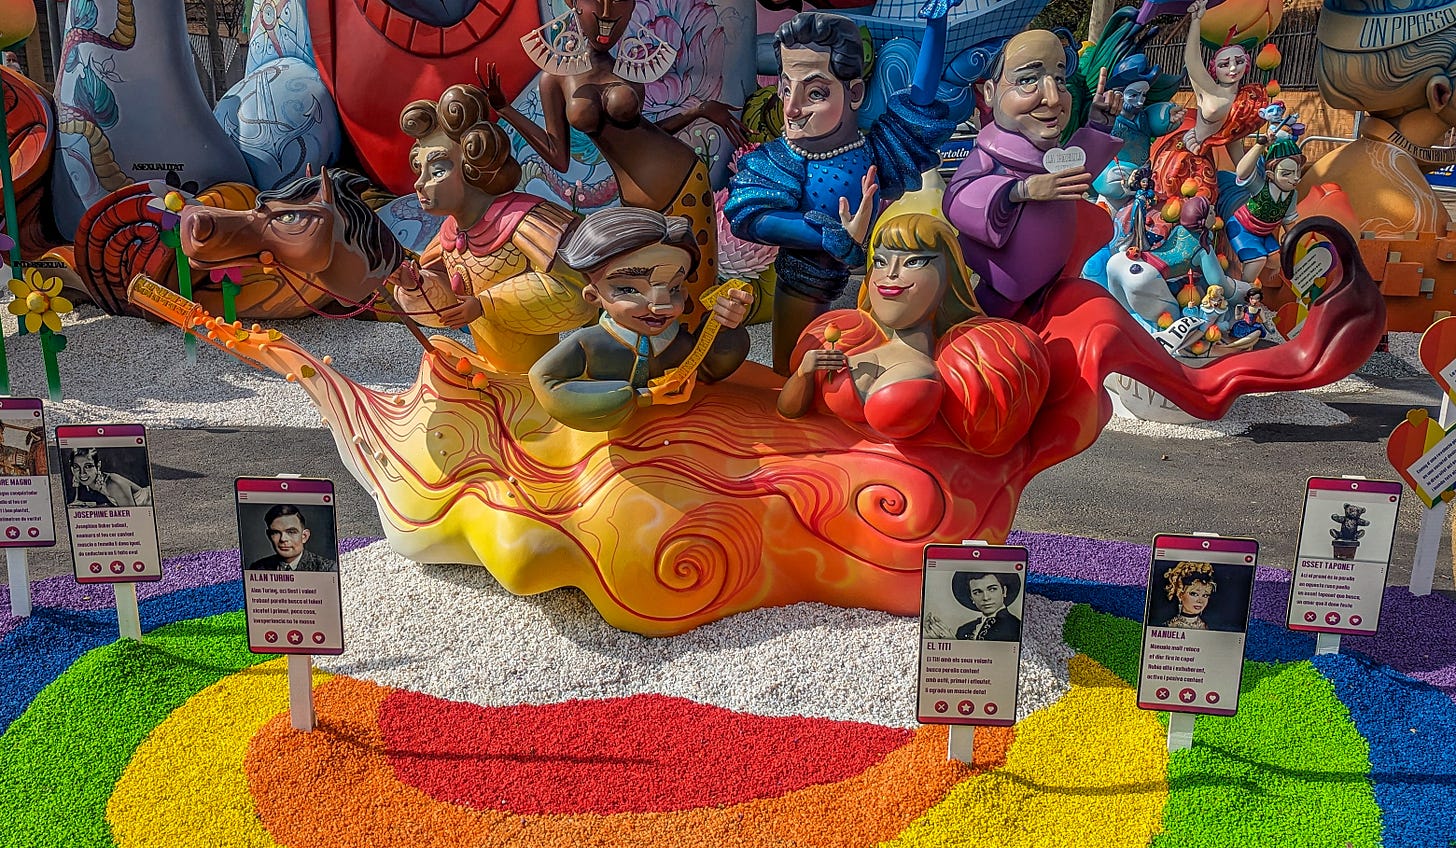 LGBTQ historical figures on a orange boat of flame. 